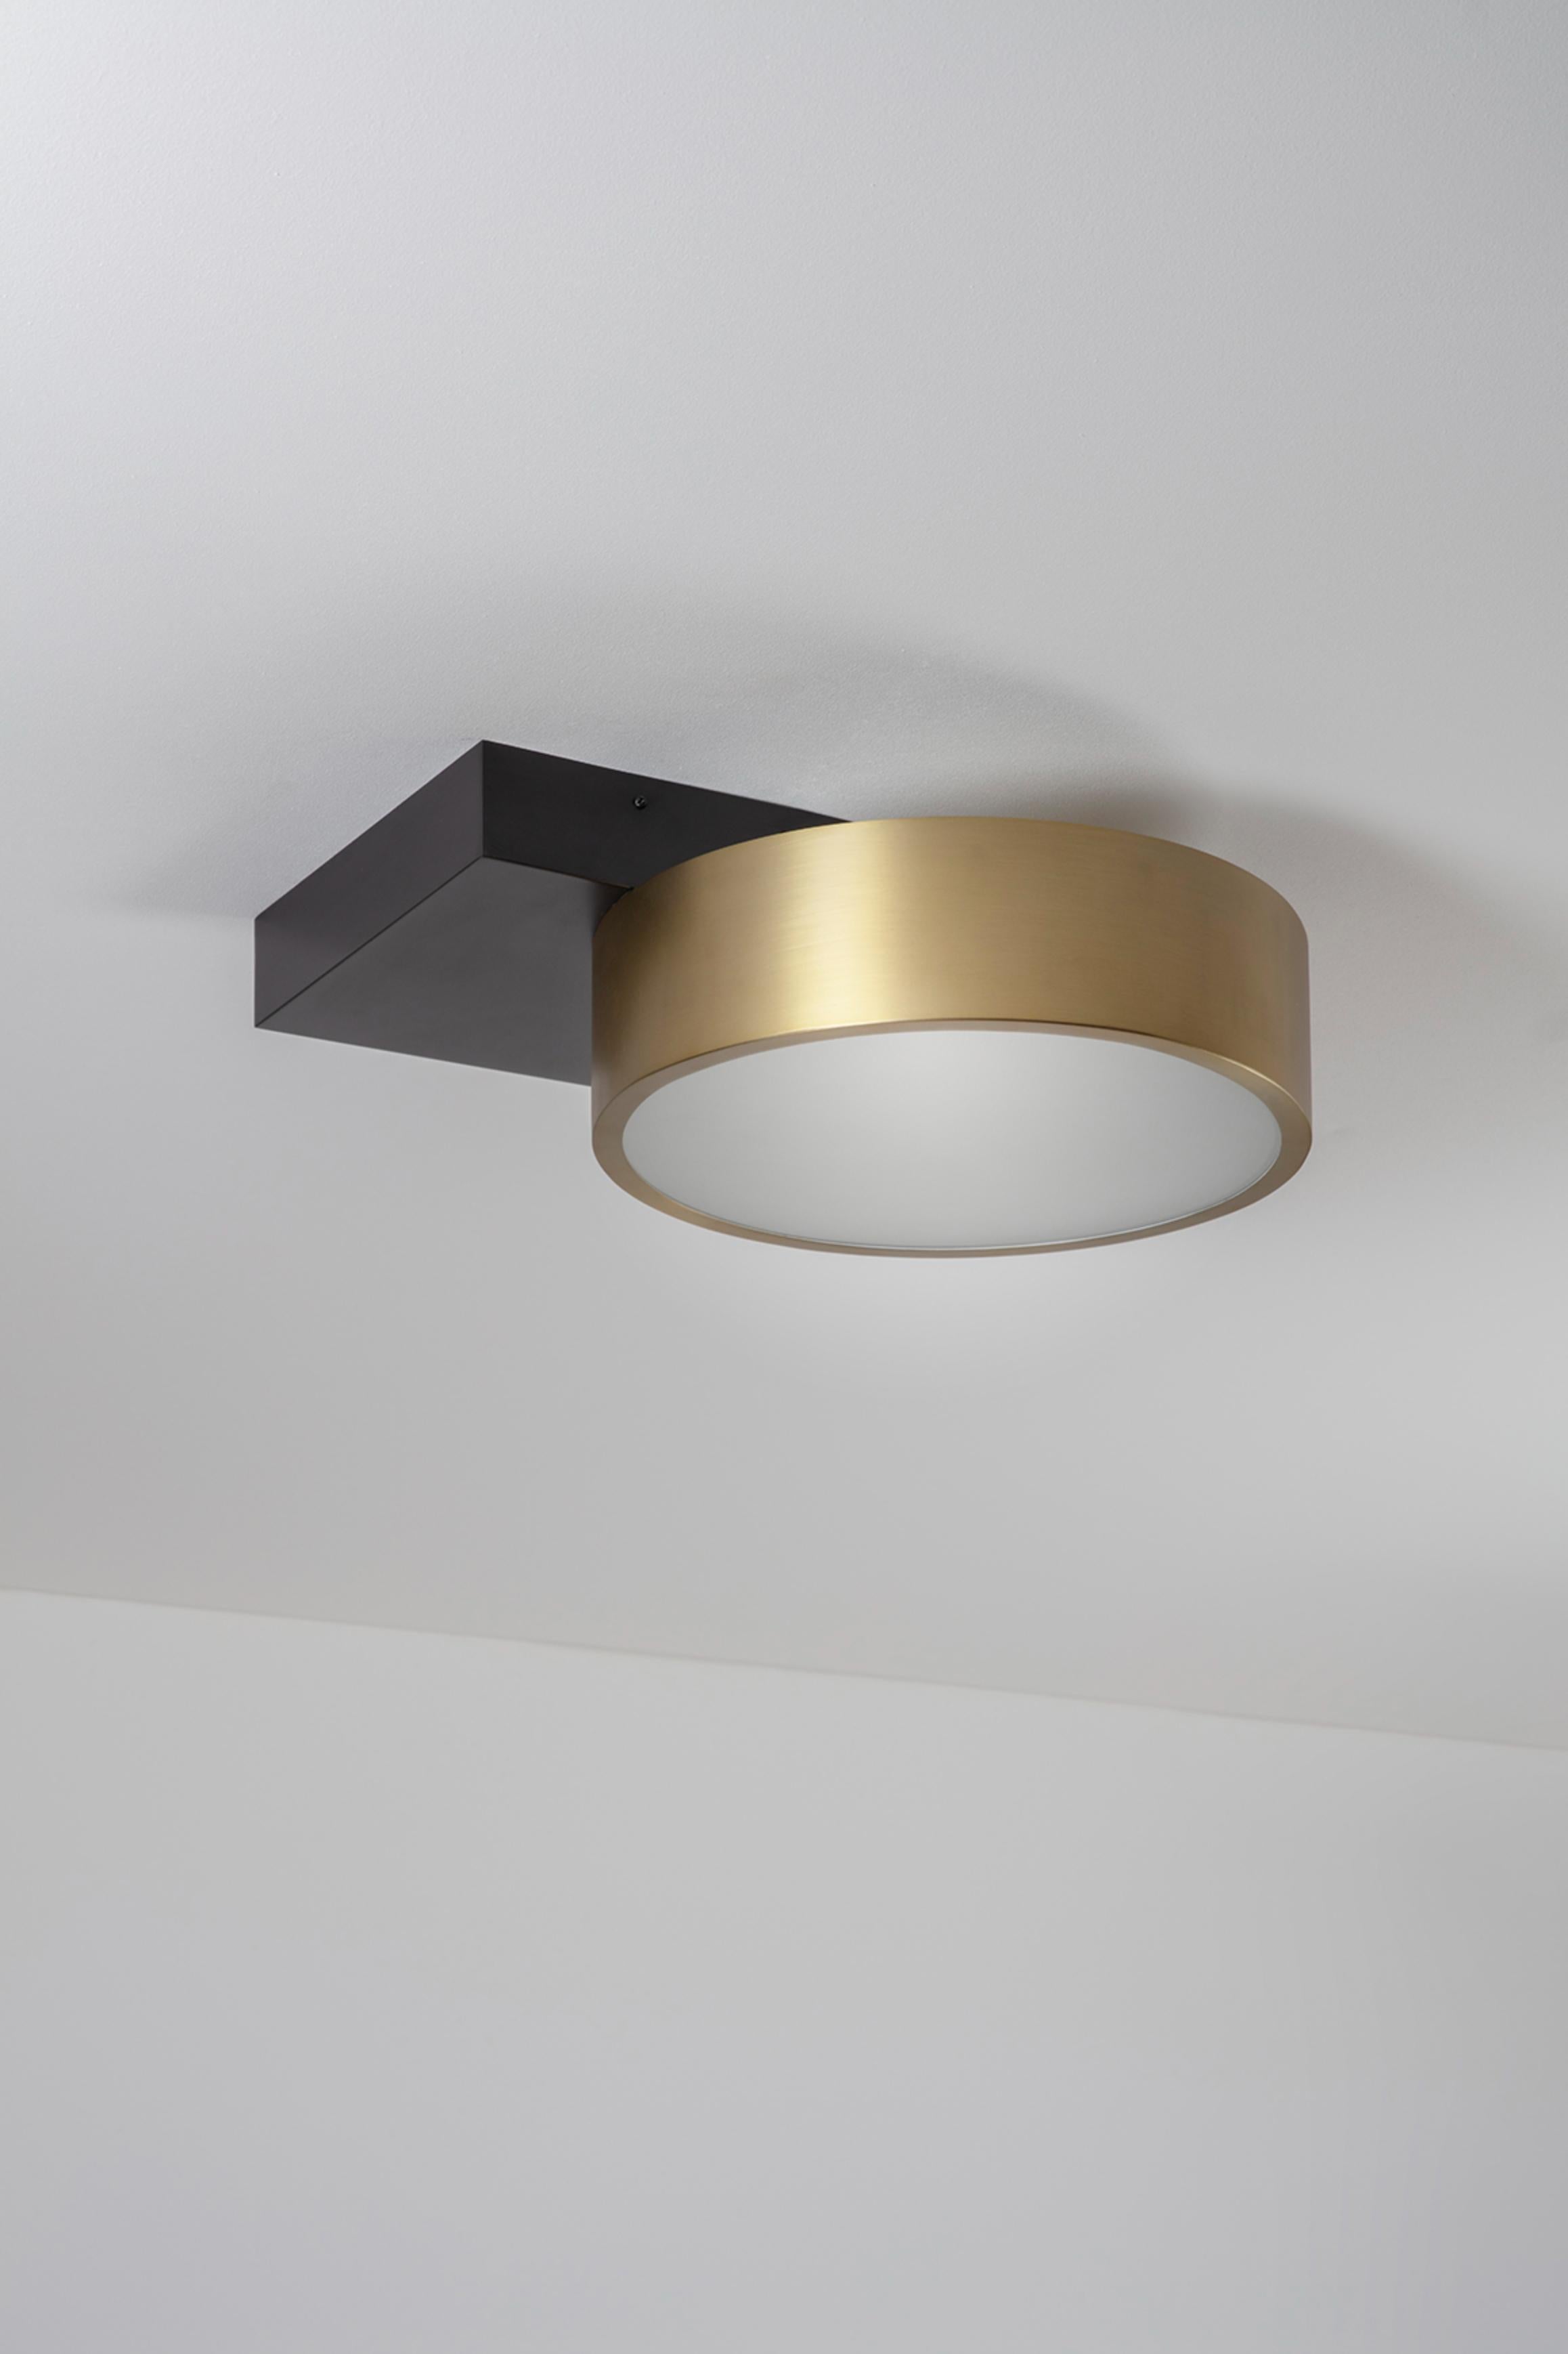 Set of 2 Square in Circle Ceiling Lights by Square in Circle
Dimensions: D 43 x W 43 x H 16 cm
Materials:Brushed brass/dark bronze/ white frosted glass
Other finishes available.

Simple, yet innovative, the round brushed brass ceiling light is